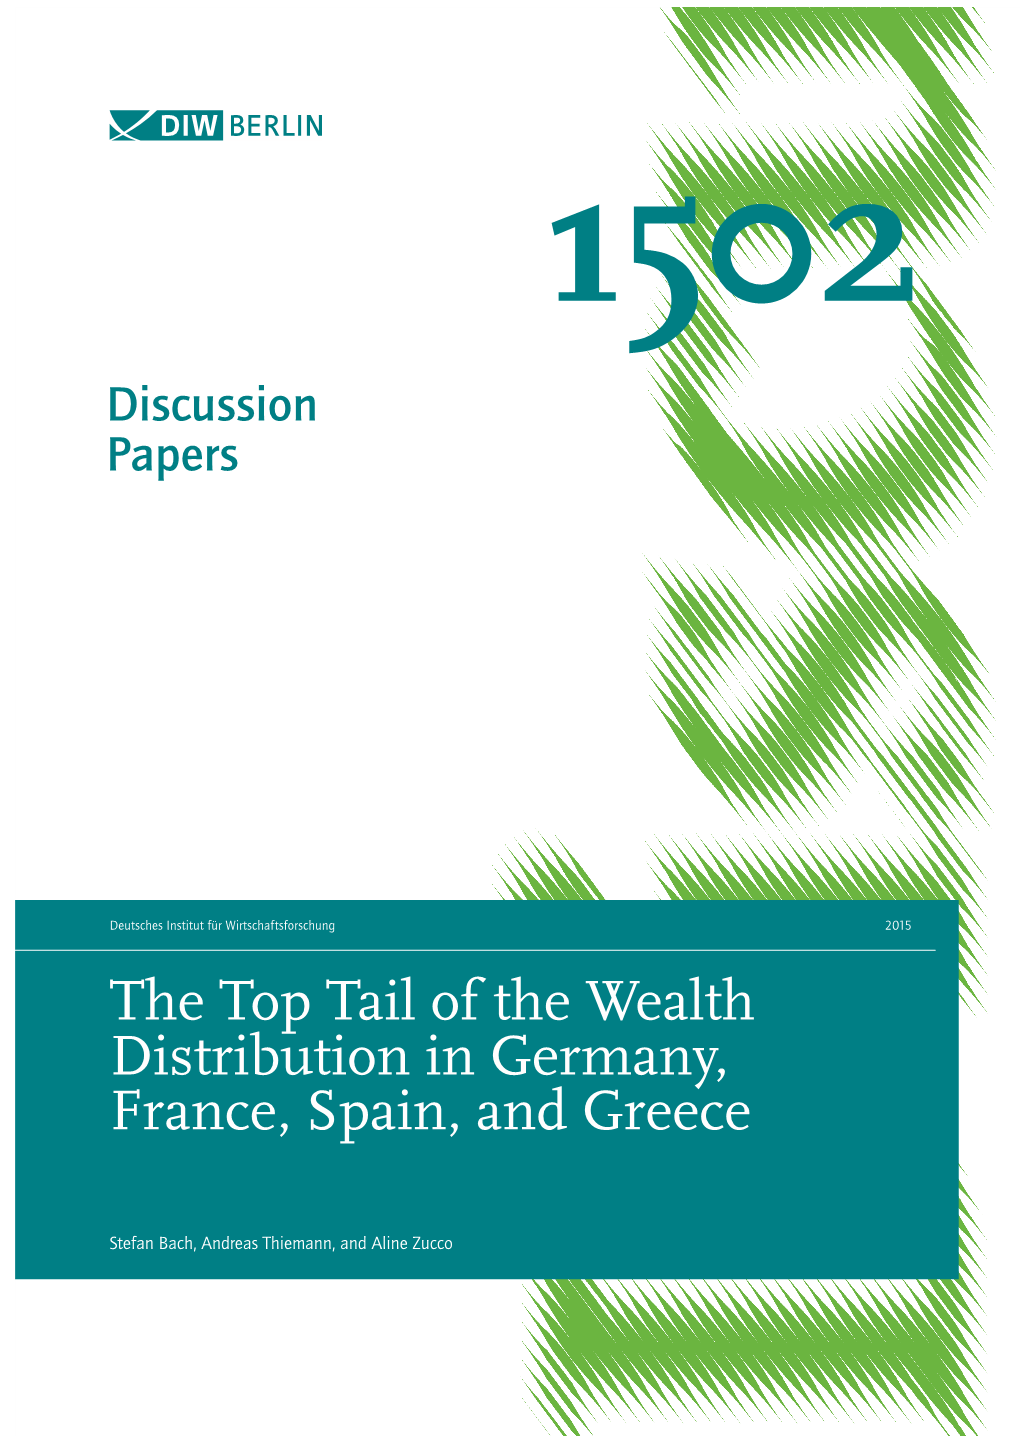 The Top Tail of the Wealth Distribution in Germany, France, Spain, and Greece